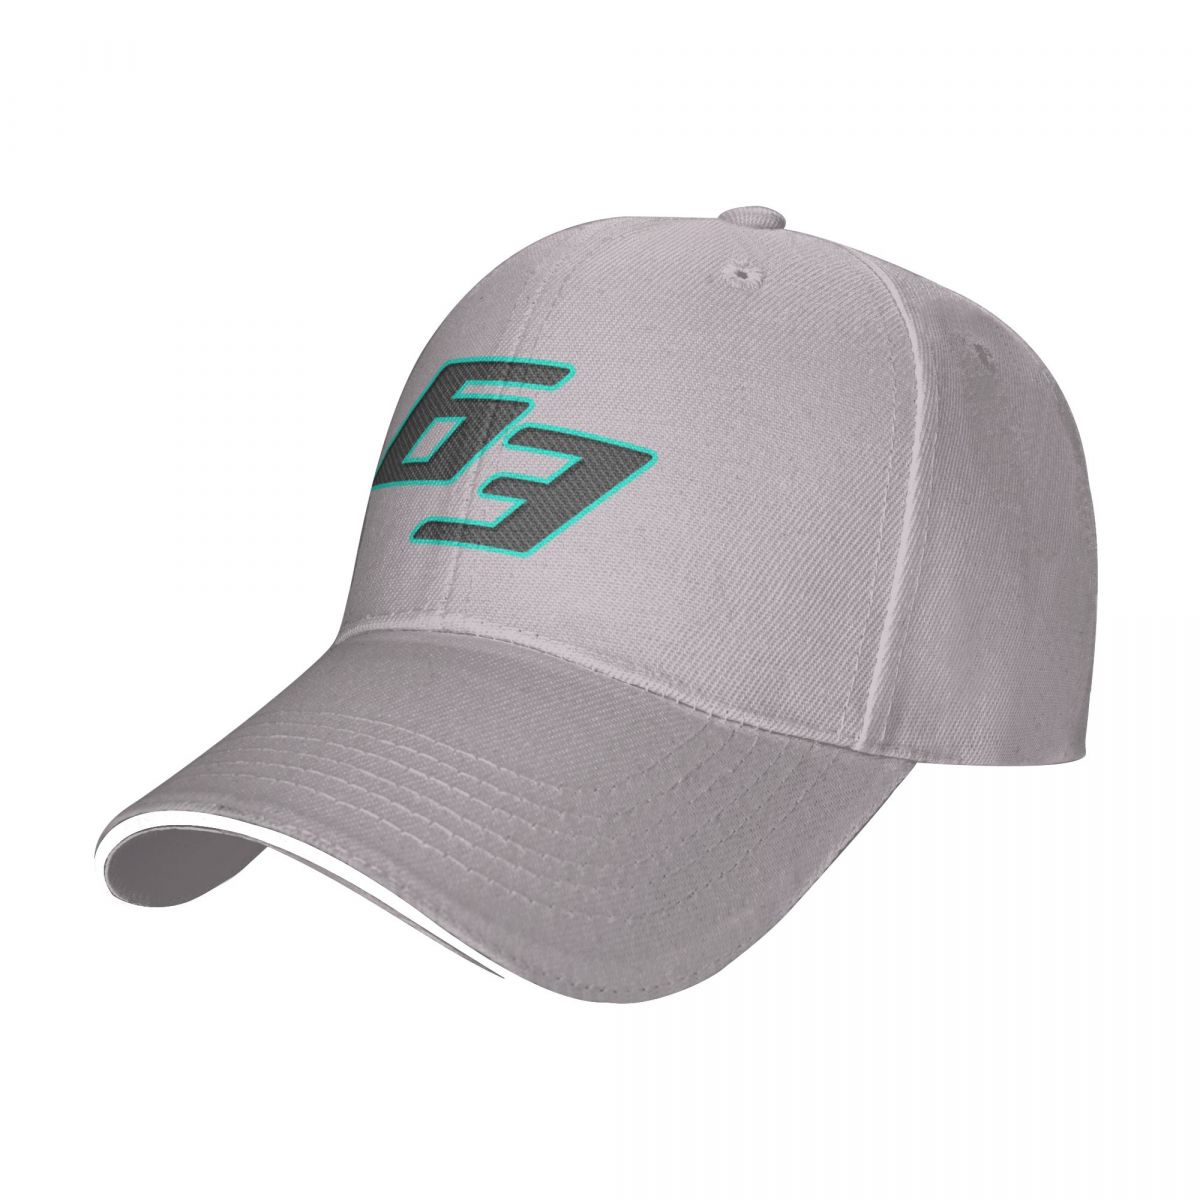 F1 Mercedes AMG 63 George Russell Baseball Cap Fan Merchandise Unisex | Best Gift for him or her | Formula 1 Gifts